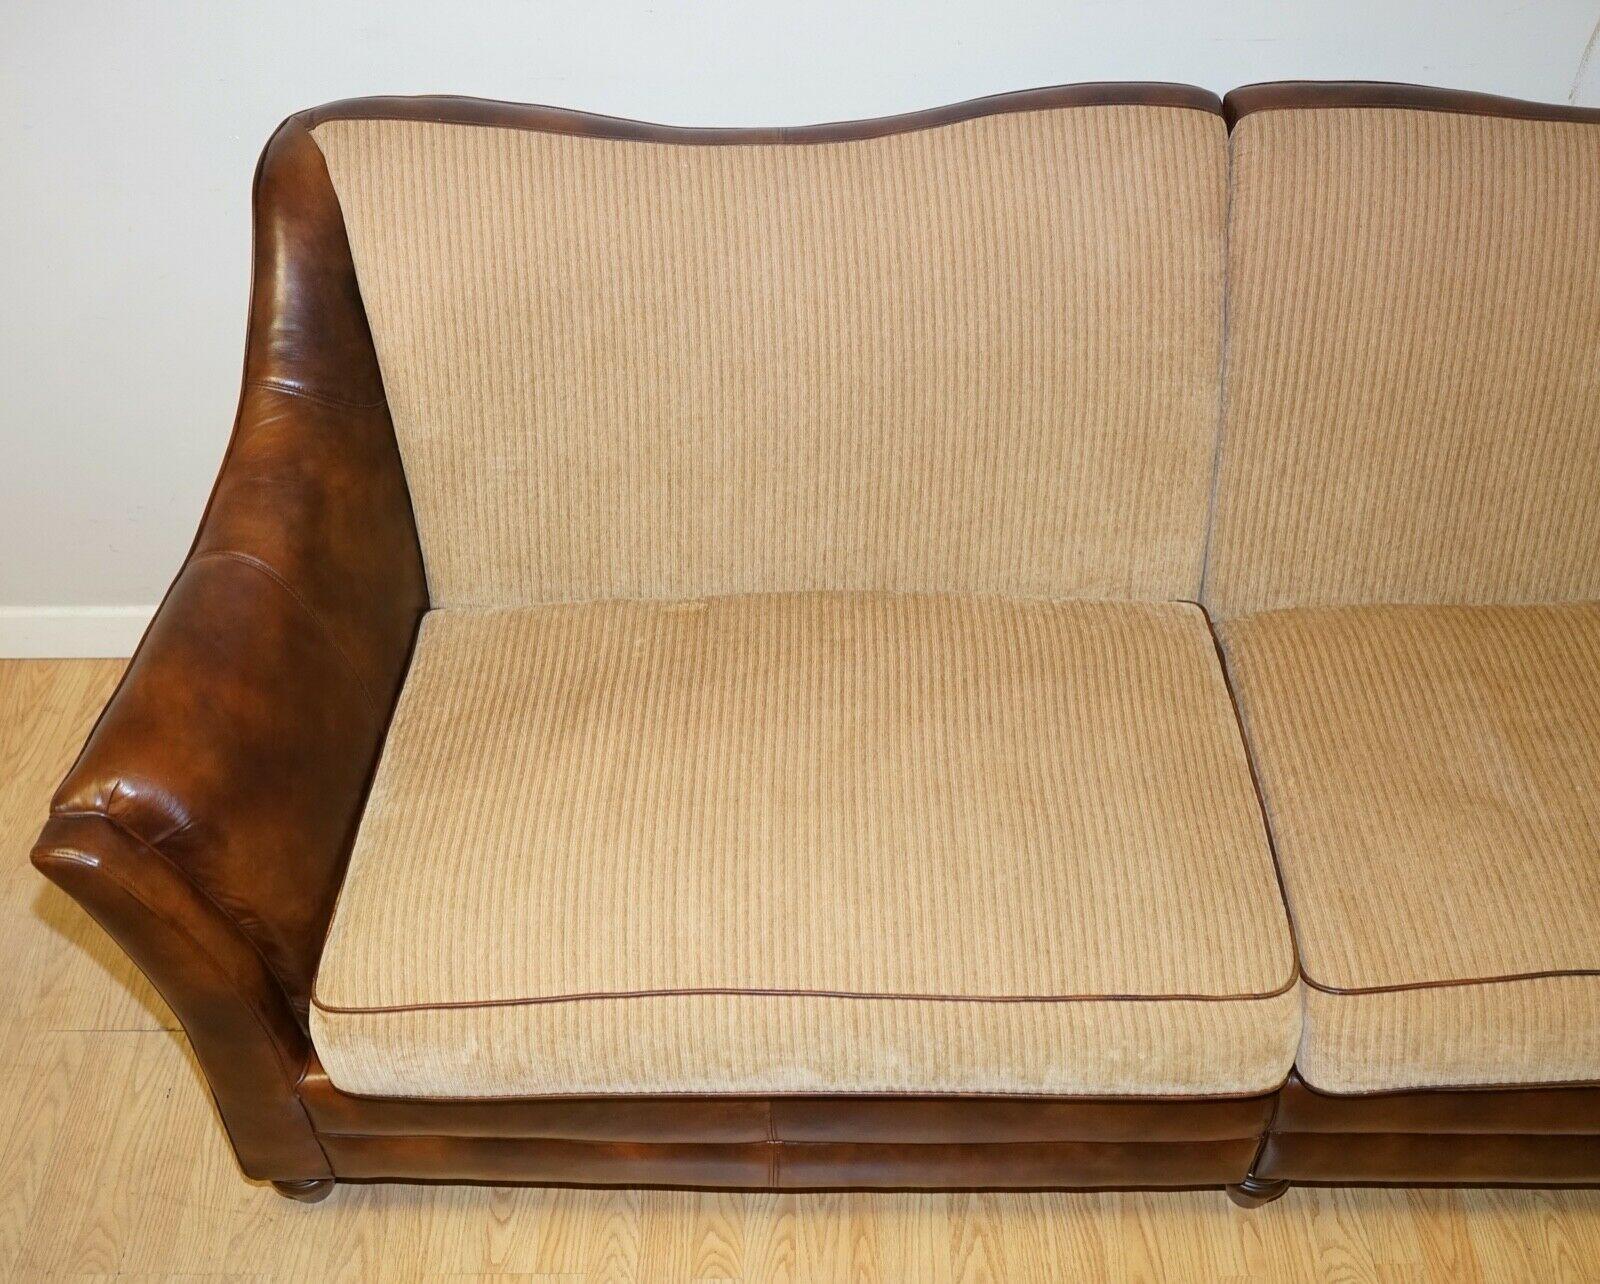 British Tetrad Style Leather and Fabric Sofa with New Duck Down Feather Scatter Pillows